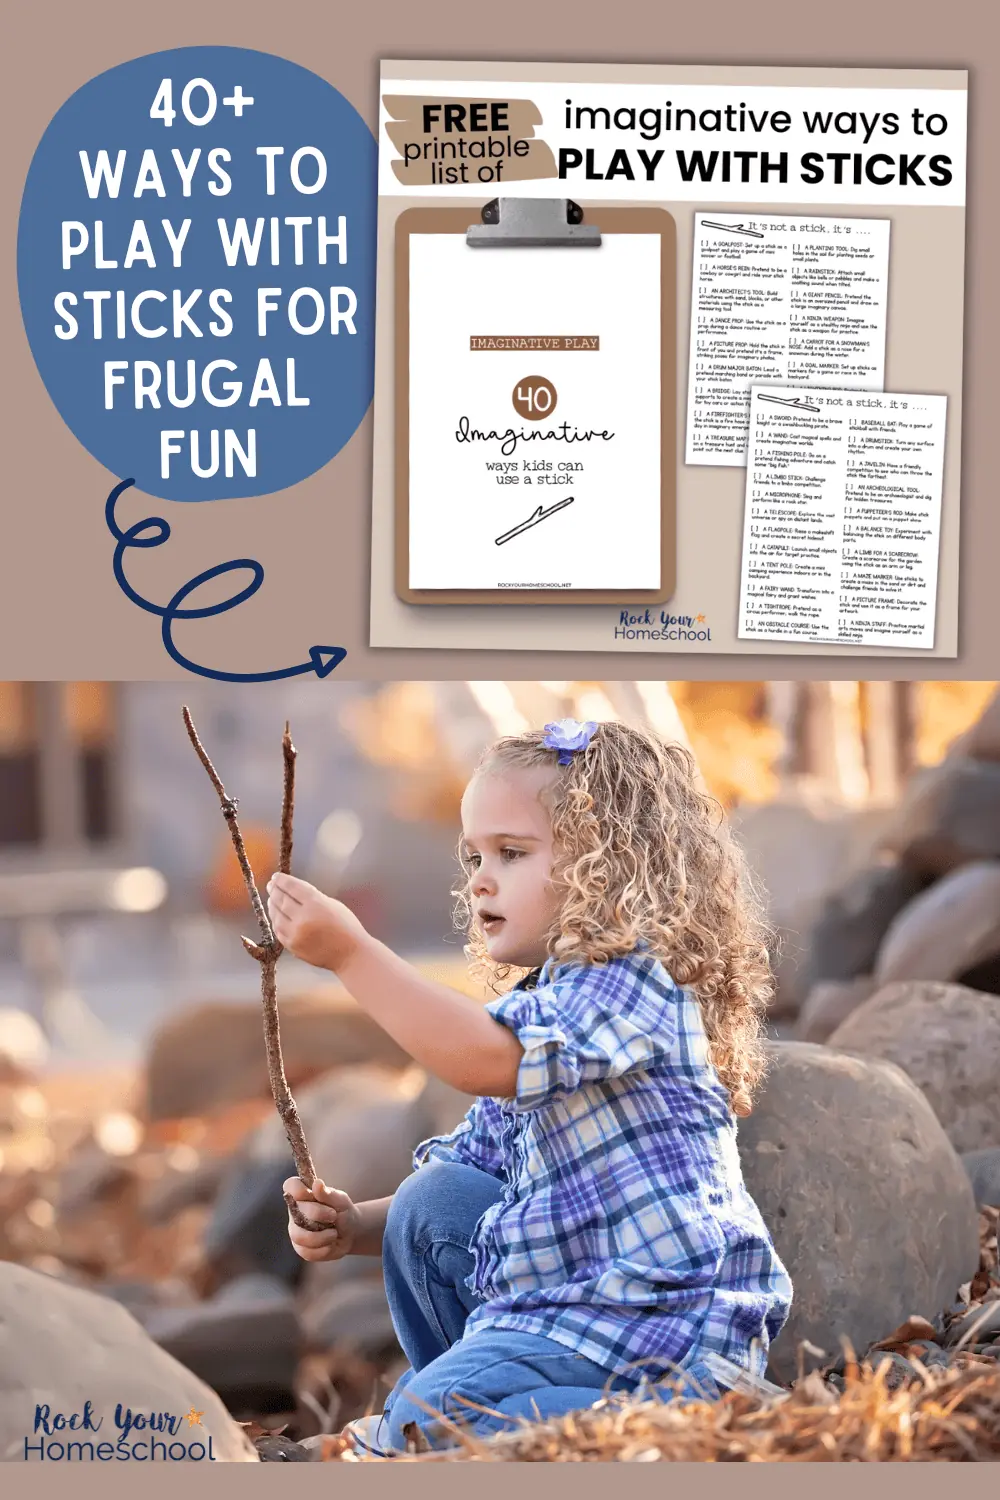 Play with Sticks: 40+ Ideas for Imaginative Fun with Kids (Free)